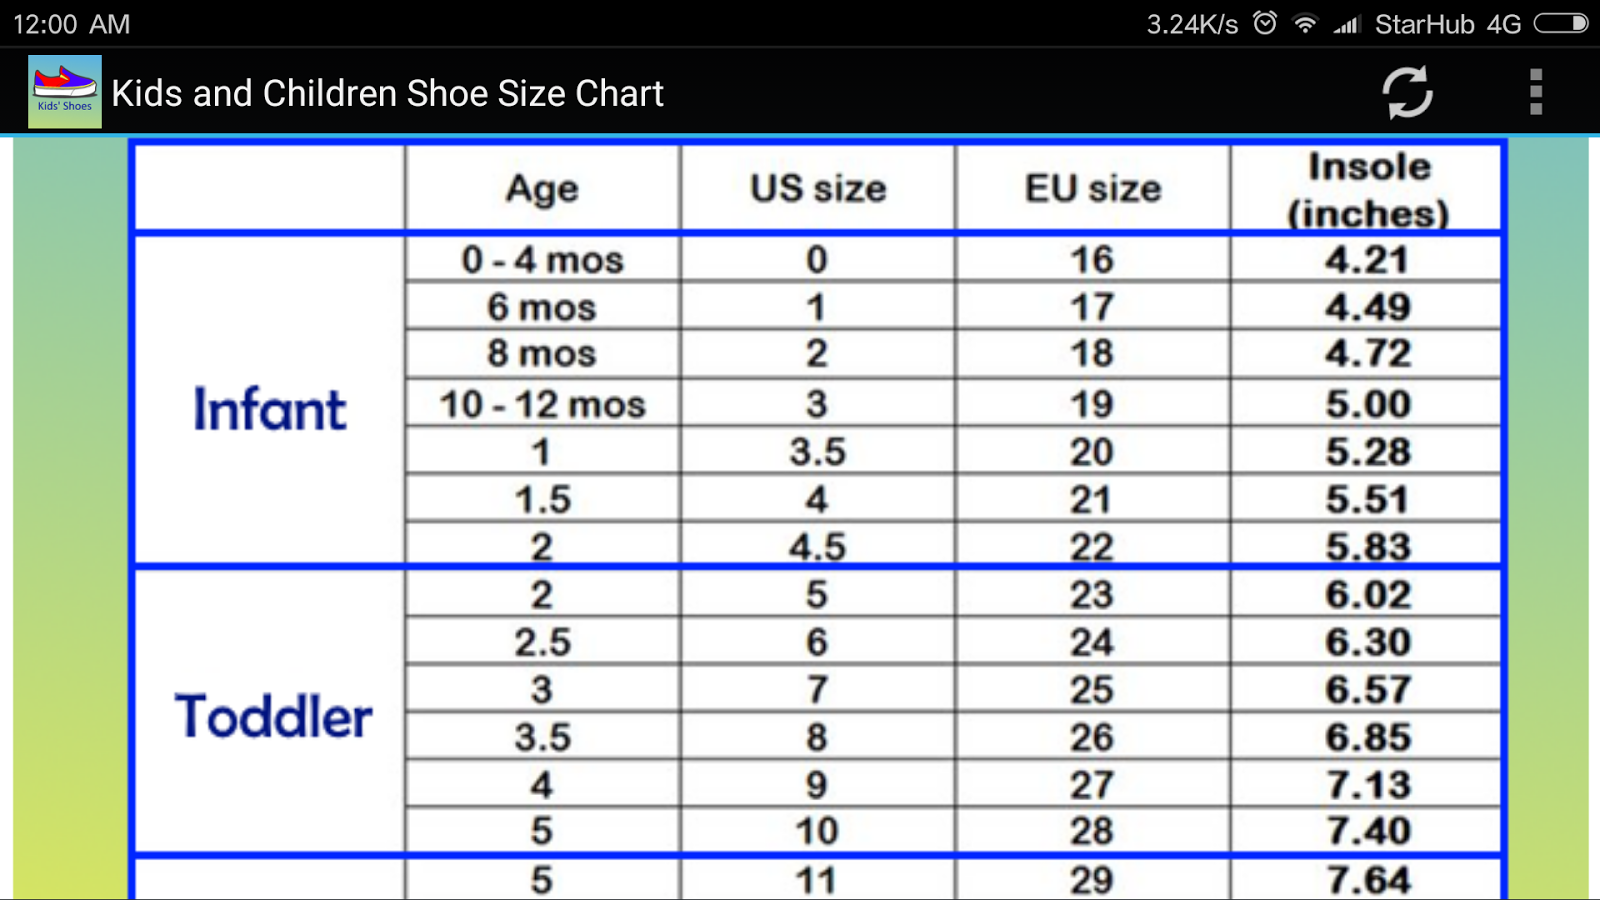 What Size Do Kids Shoes Go Up To - LoveShoesClub.com